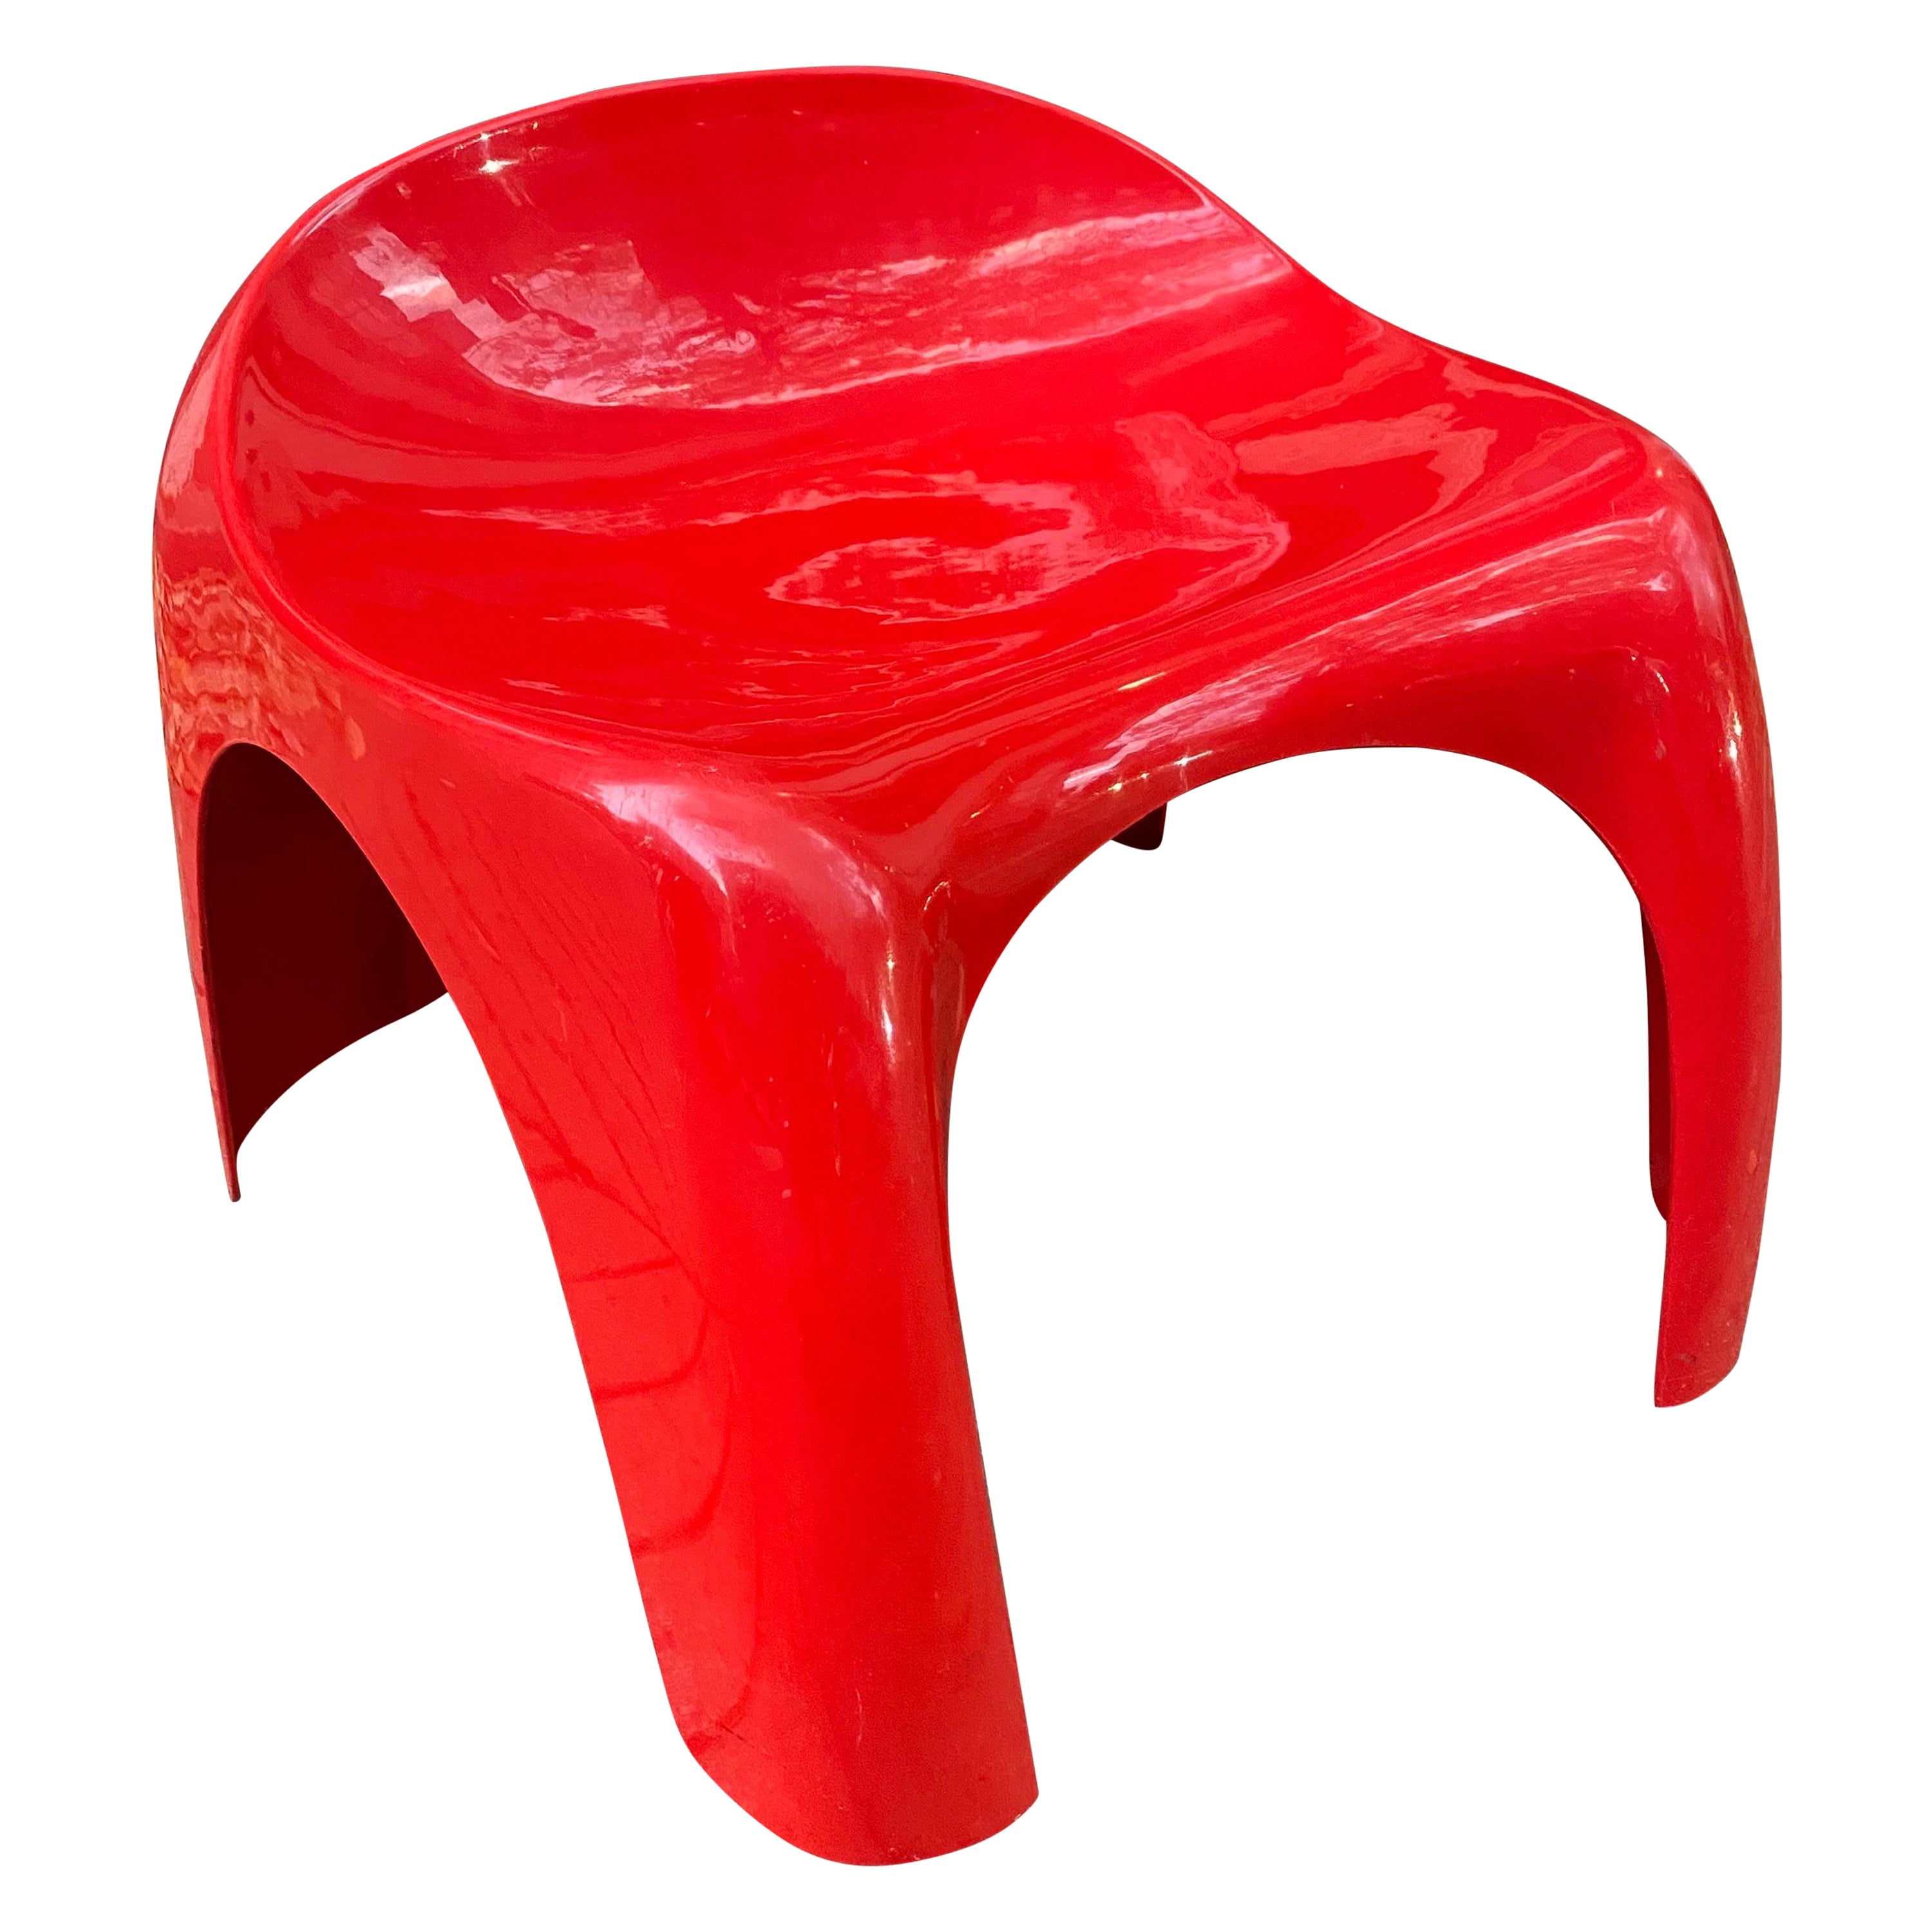 Stacy Dukes for Artemide Efebo Stool/ 3 Available!